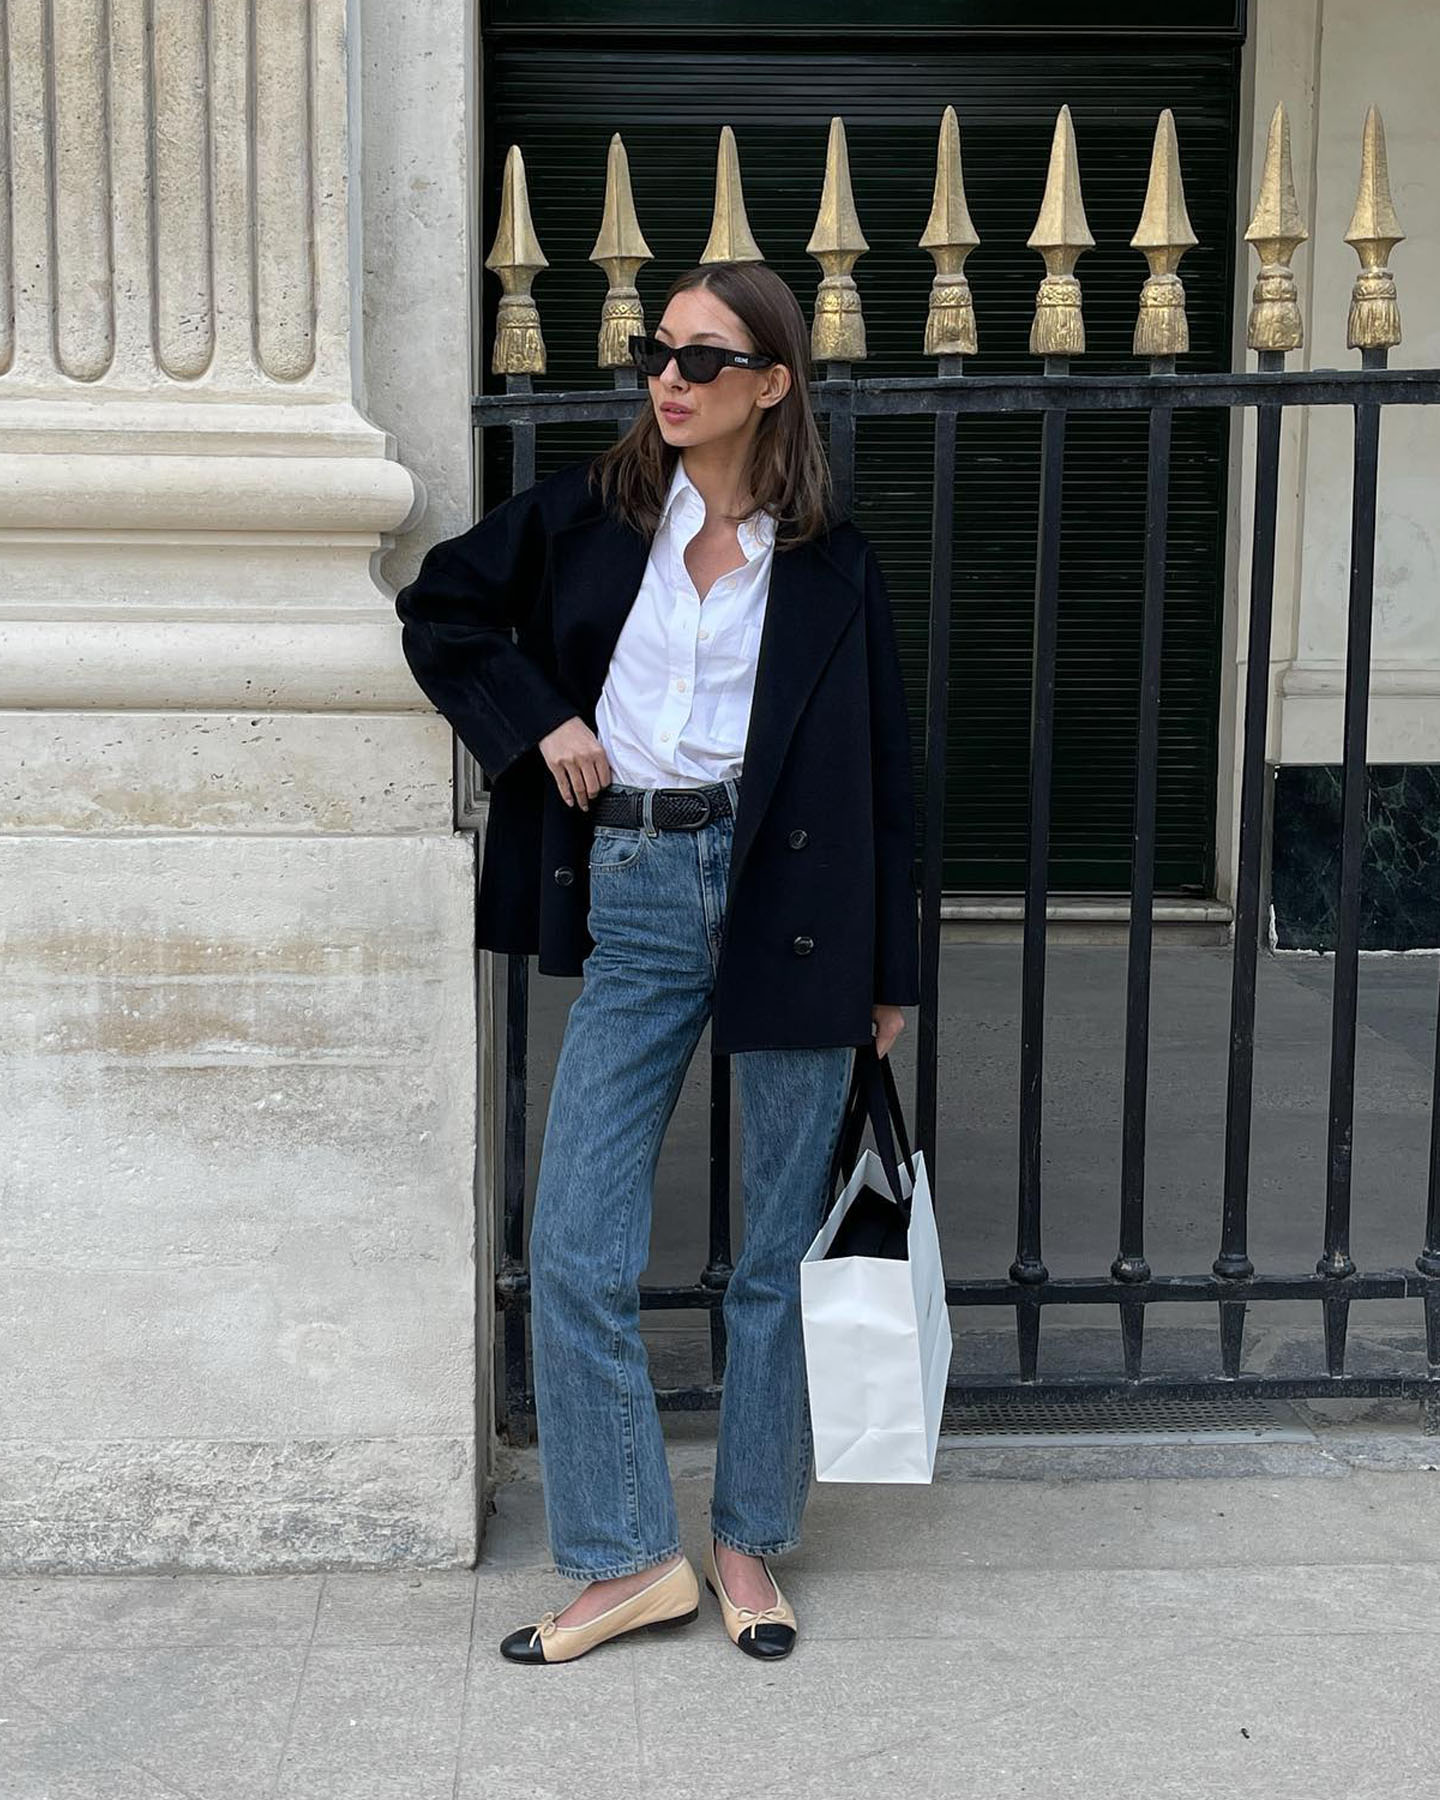 fashion influencer Felicia Akerstrom poses on the sidewalk in Paris wearing a black blazer, white button-down shirt, belt, jeans, and Chanel cap-toe ballet flats